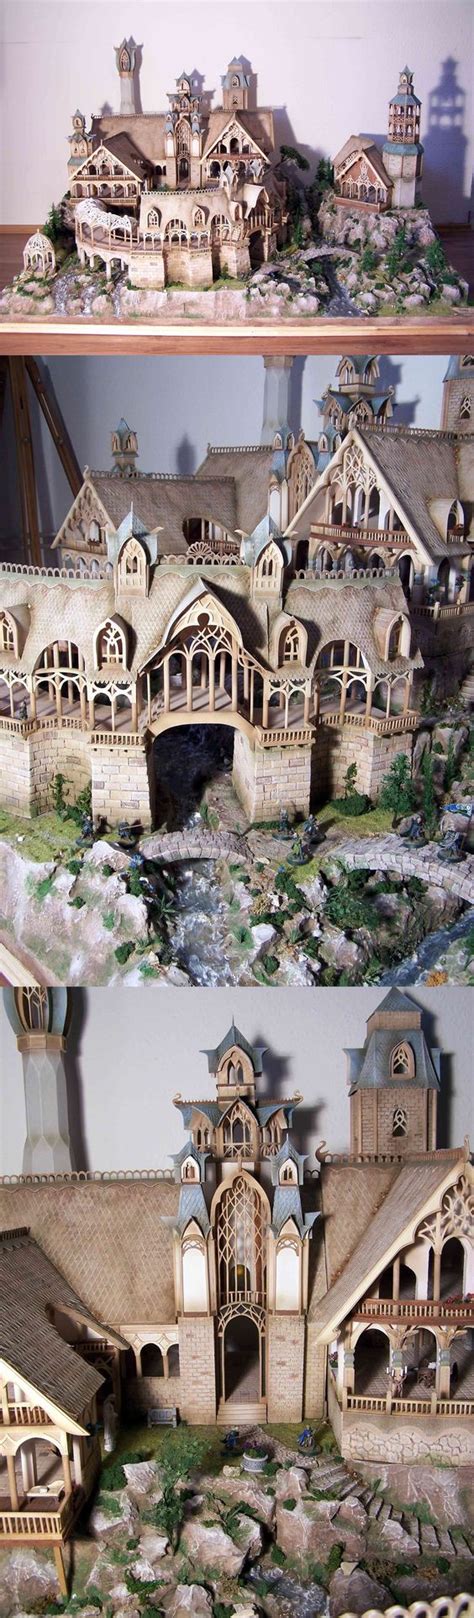 Coolminiornot Rivendell House Of Elrond Lord Of The Rings Elven